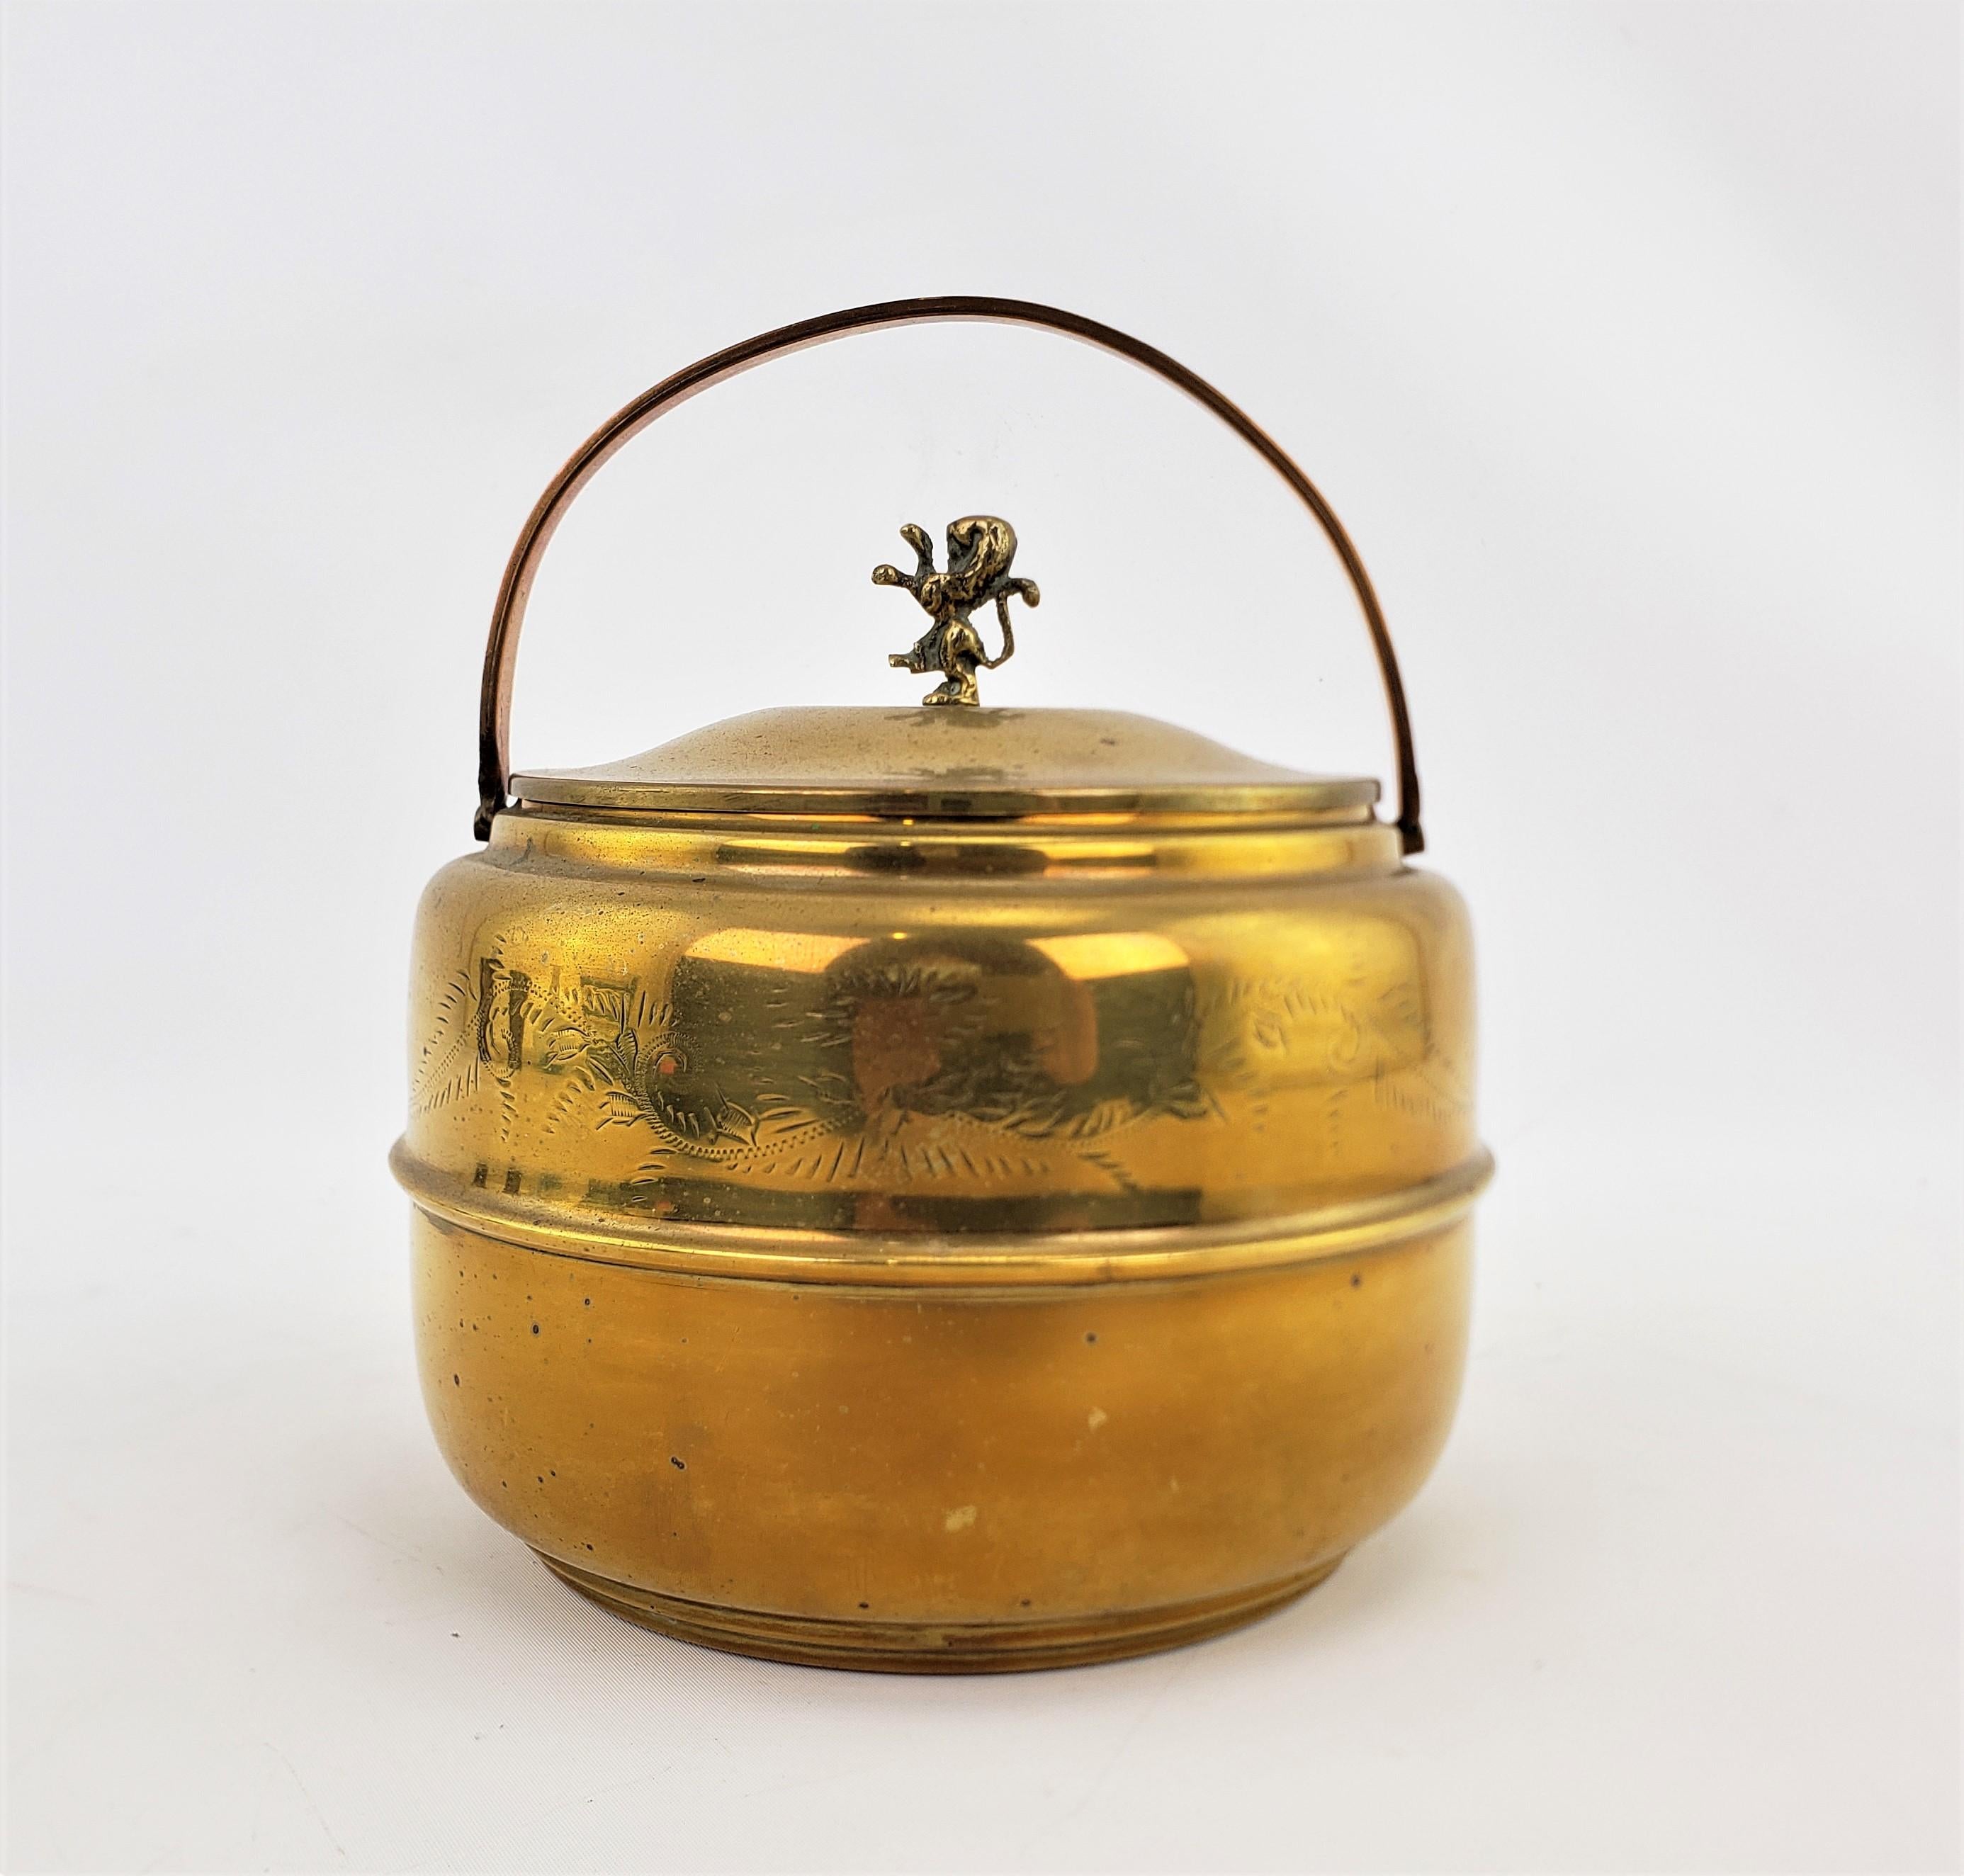 This brass ice bucket shows no maker's signature, but is presumed to have originated from England and dating to approximately 1920 and done in the period Art Deco style. The outer shell and handle are composed of solid brass with some accenting